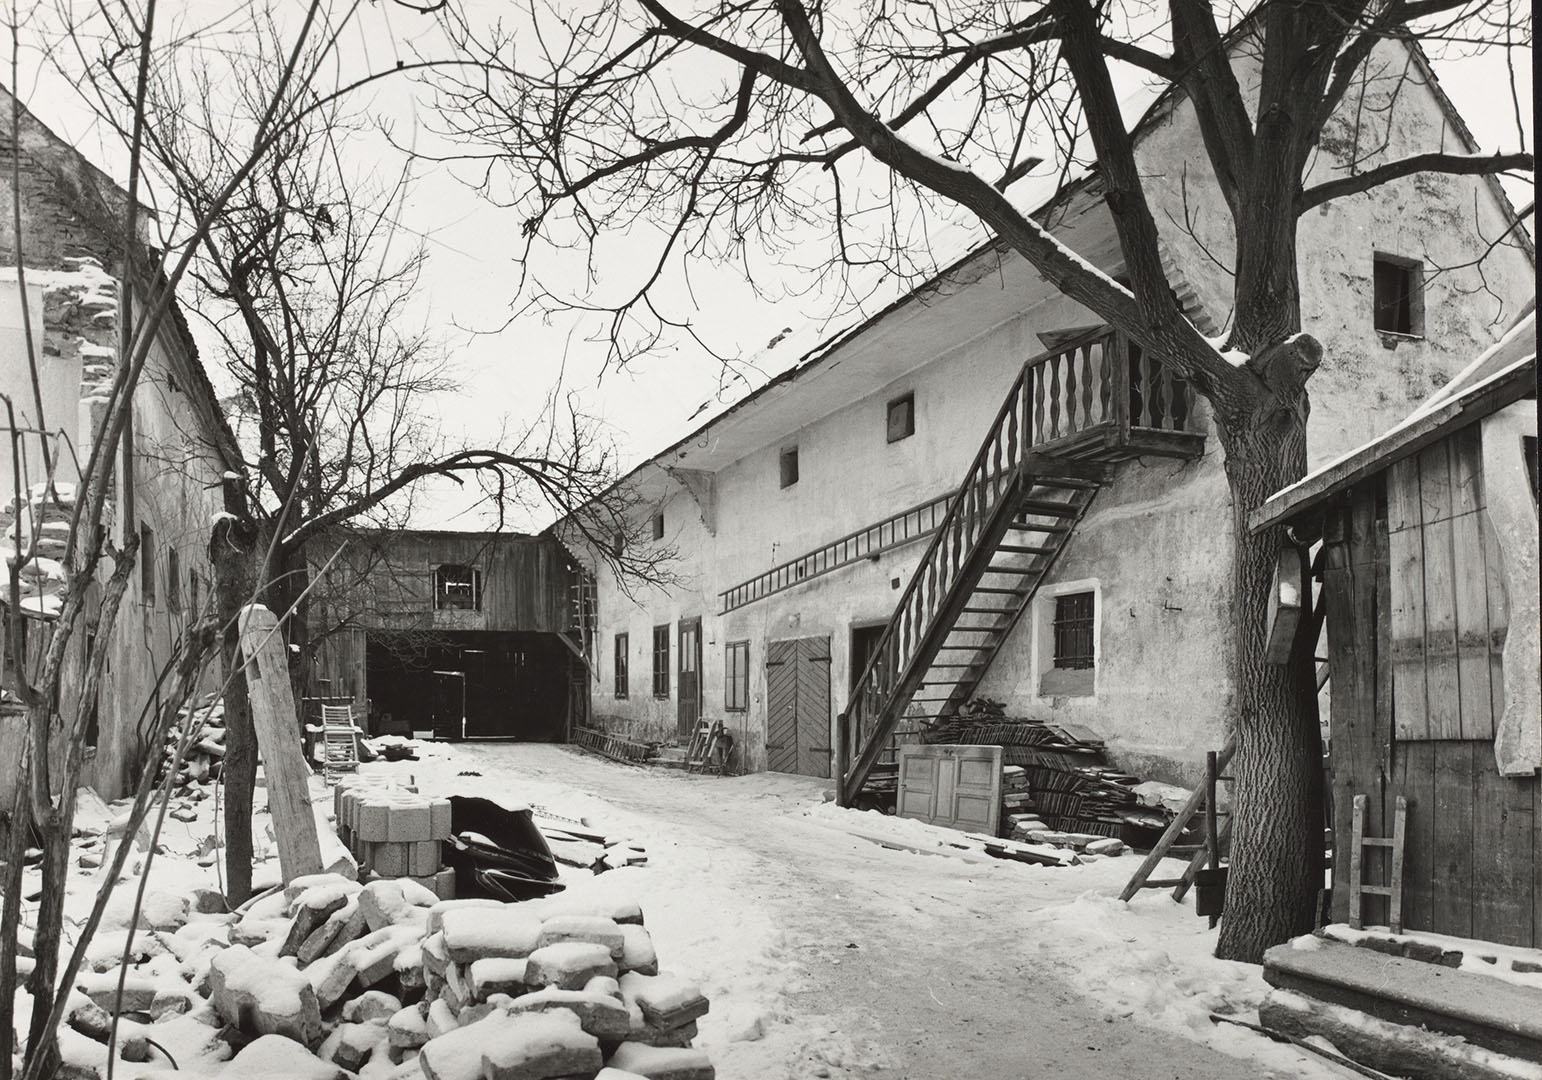 Kokoschka’s birthplace in Pöchlarn in February 1964. The photograph from the estate shows the building prior to the erection of the memorial in 1973 (ZBZ, estate of O. Kokoschka 851.1 / photo: © NLK Nechuta)